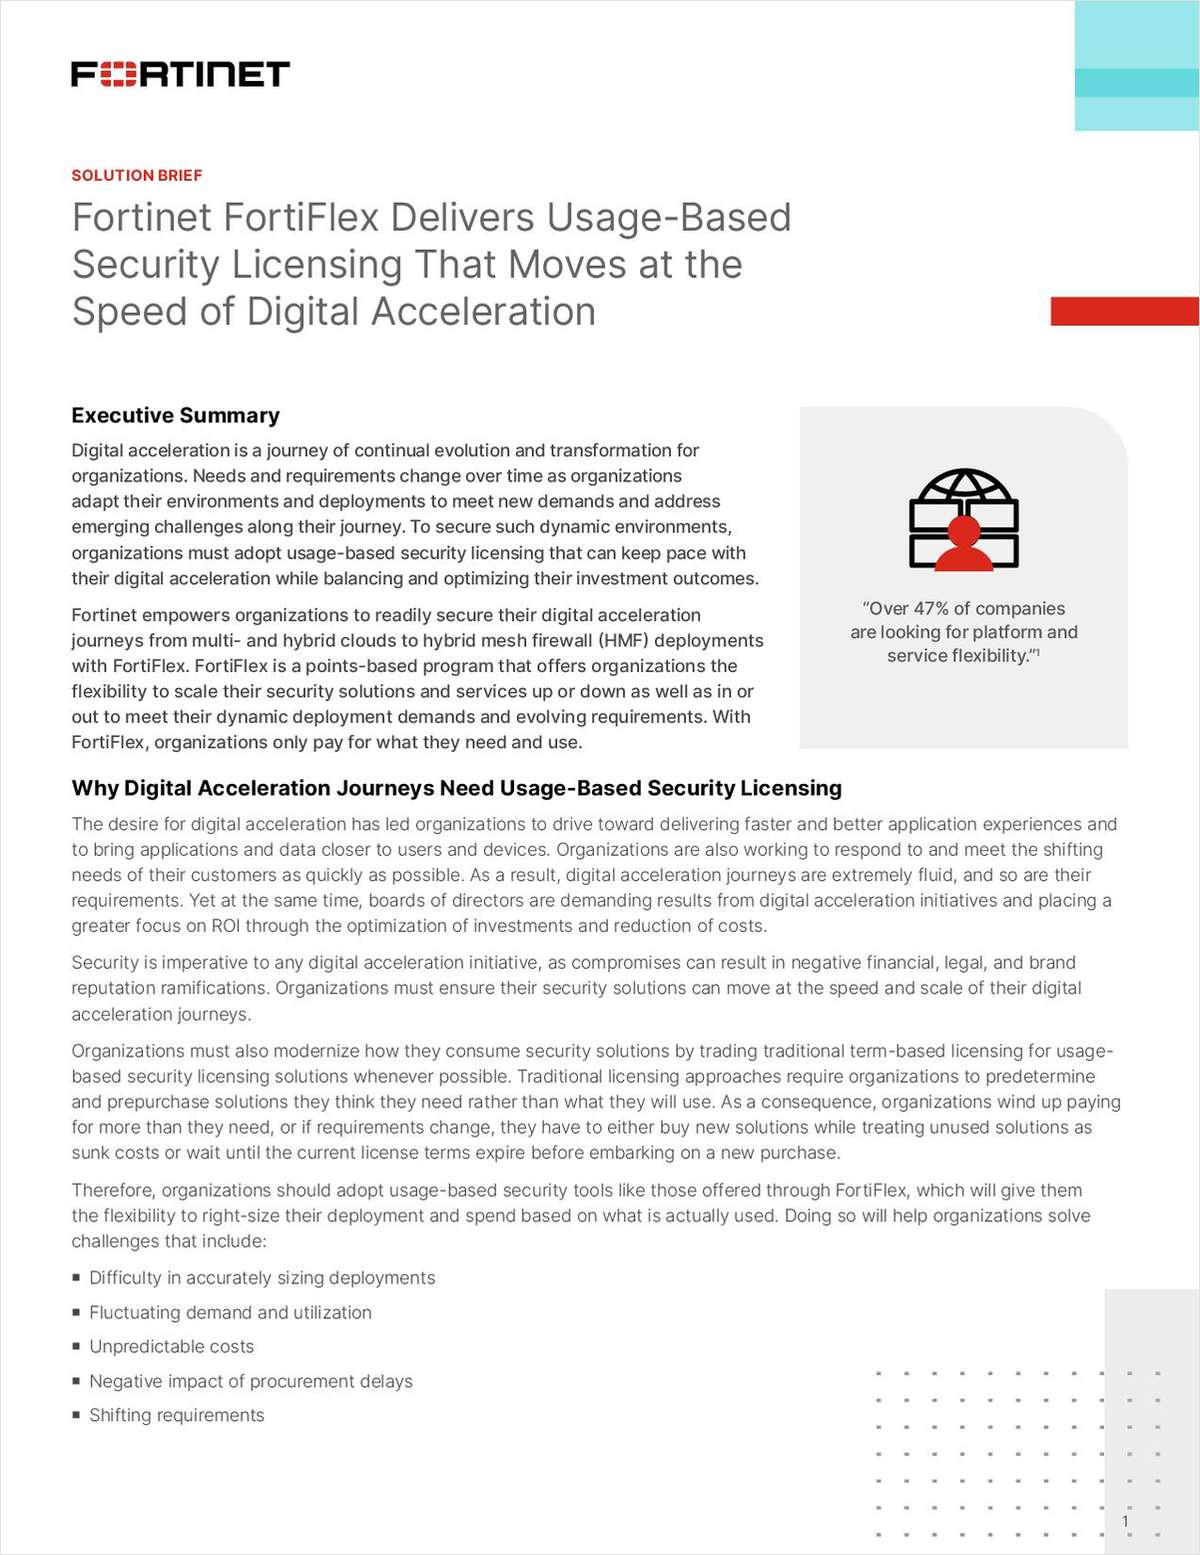 Solution Brief: Fortinet FortiFlex Delivers Usage-Based Security Licensing That Moves at the Speed of Digital Acceleration​